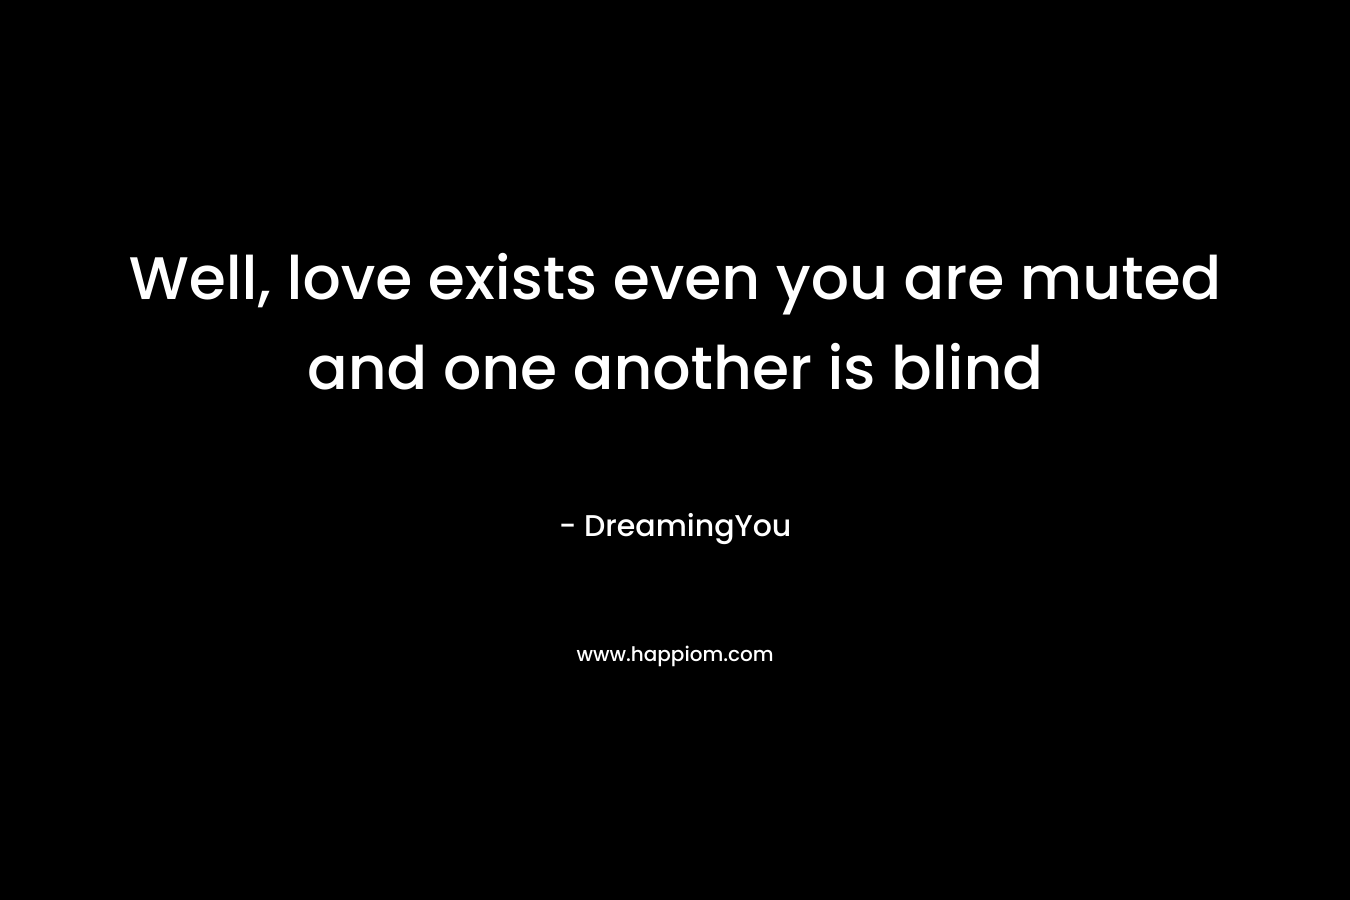 Well, love exists even you are muted and one another is blind